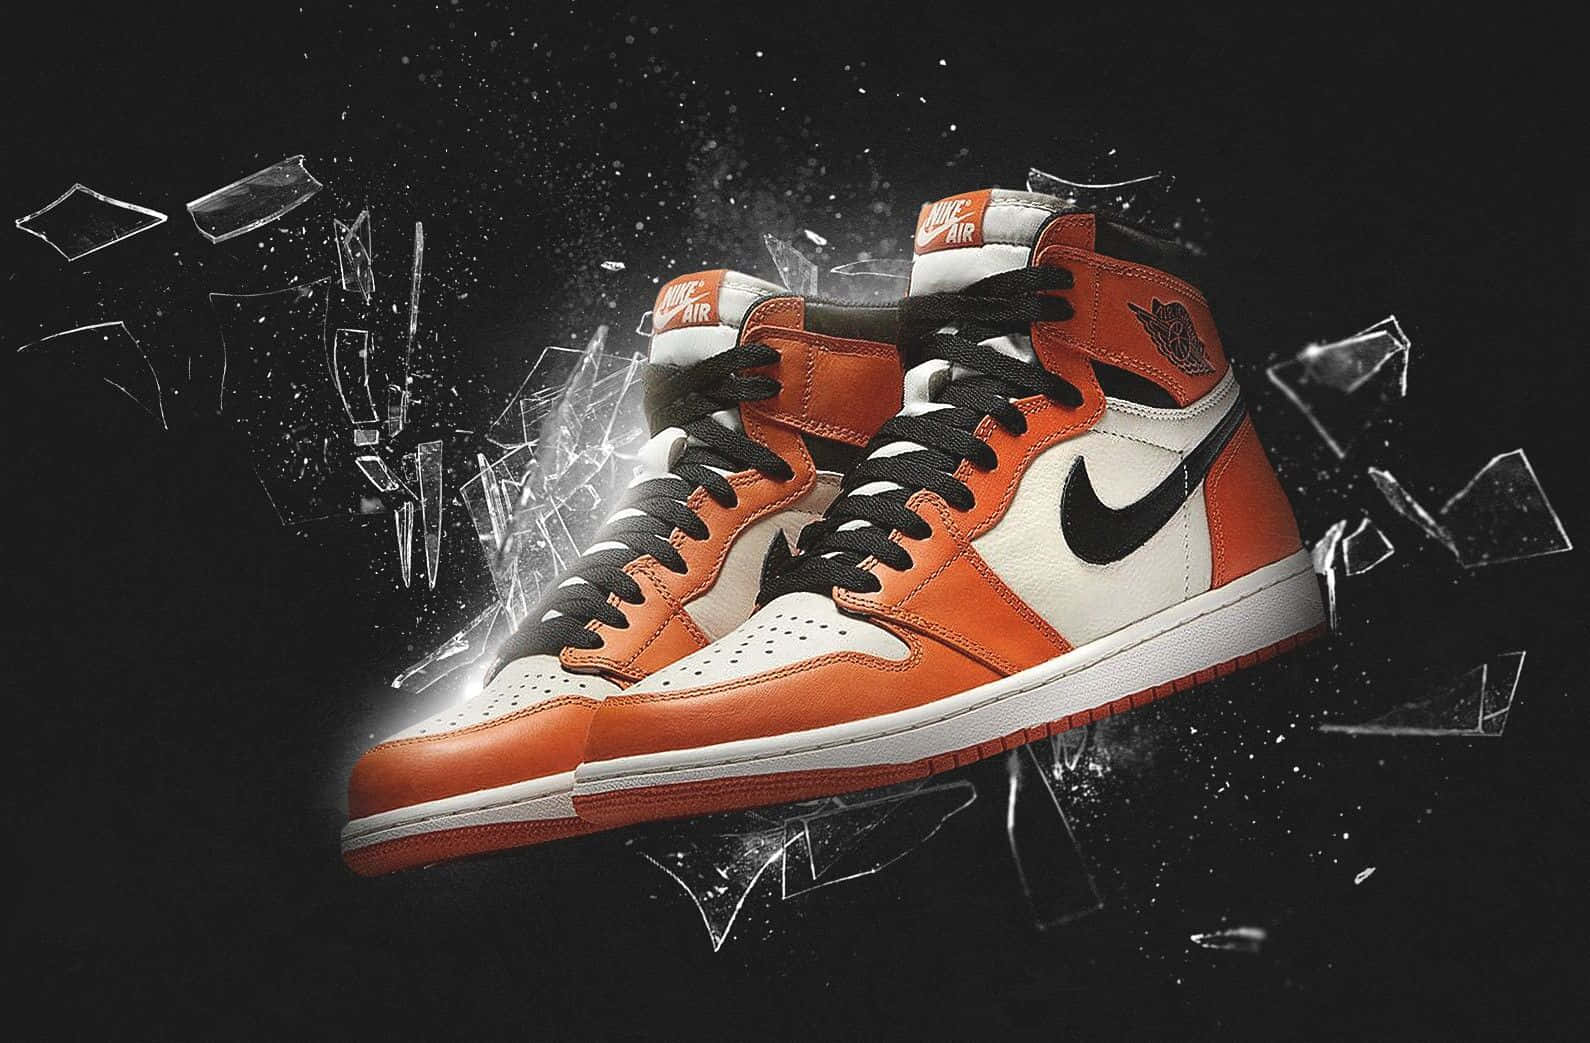 Get ready to jump higher with Nike Air Jordan shoes Wallpaper